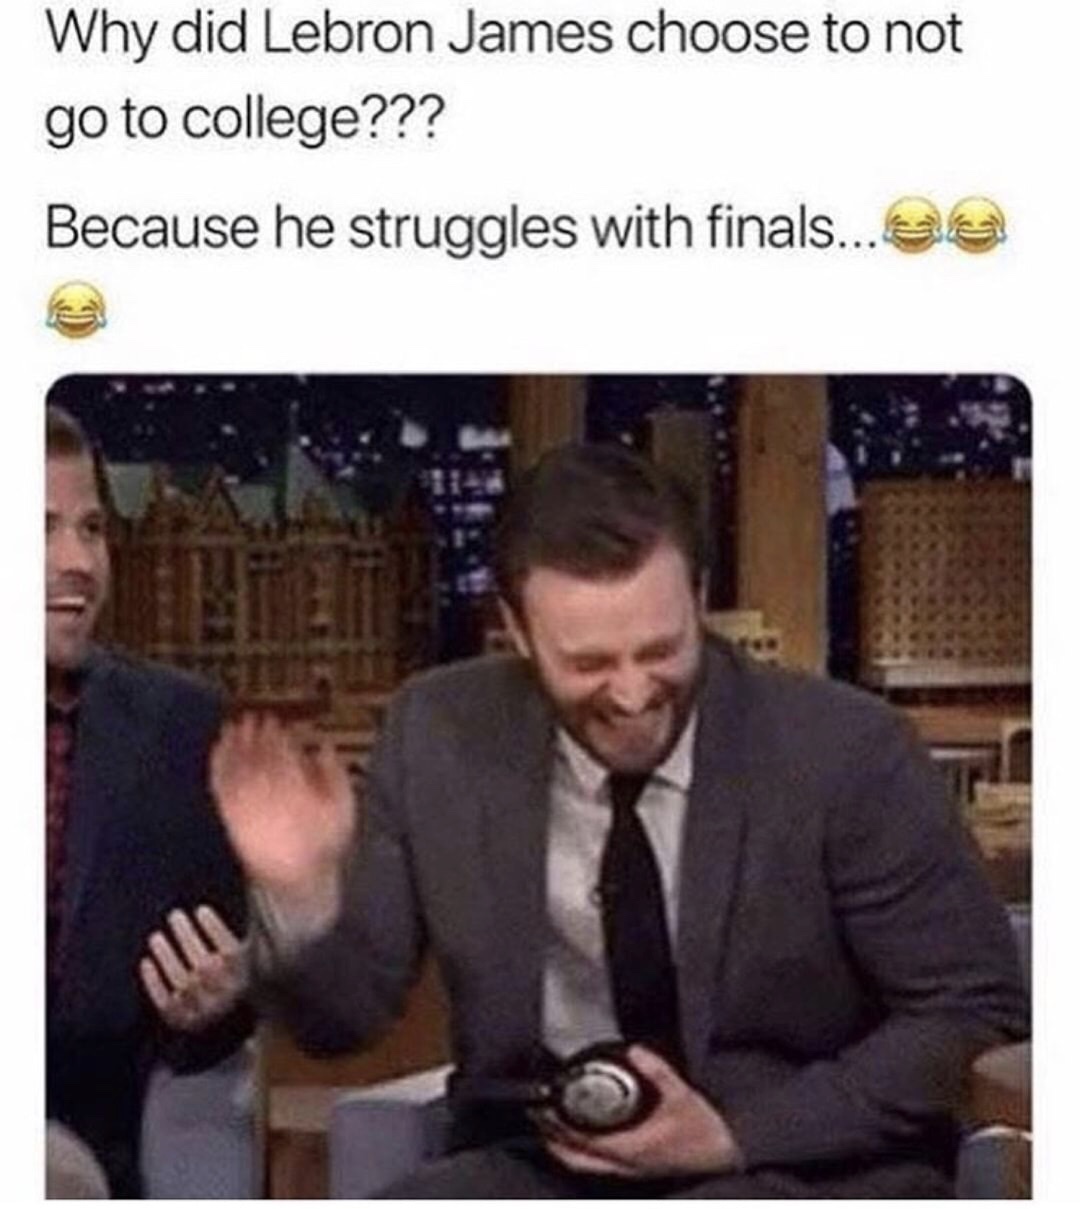 meme stream - photo caption - Why did Lebron James choose to not go to college??? Because he struggles with finals...ee a